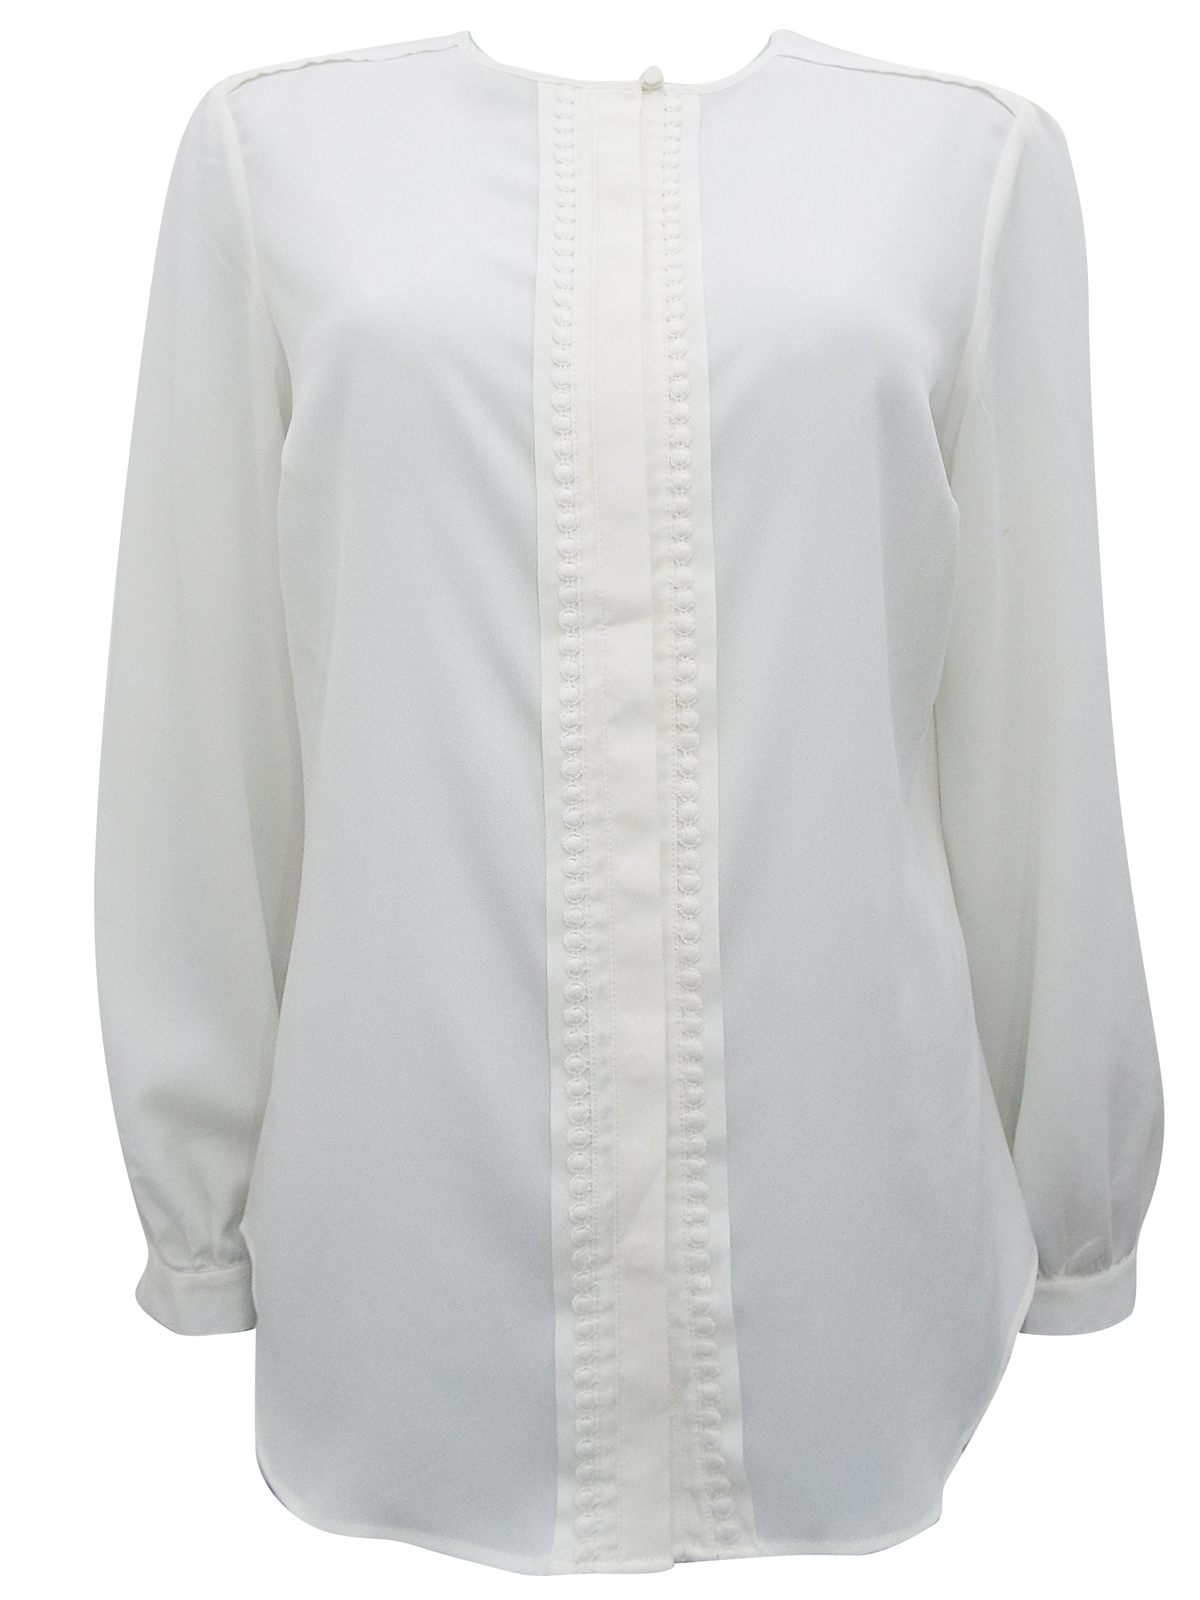 Marks and Spencer - - M&5 IVORY Long Sleeve Blouse - Size 8 to 22